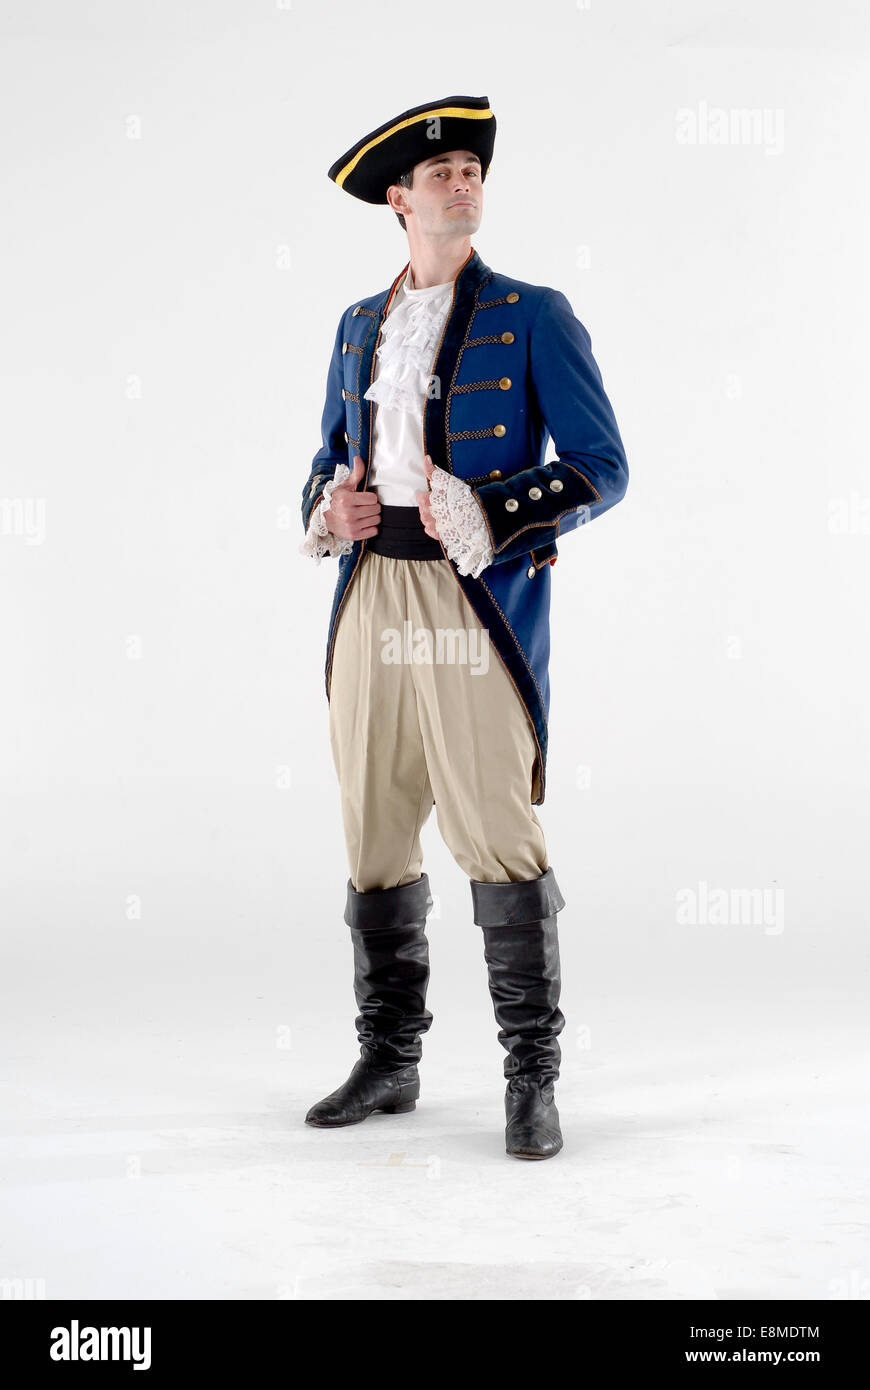 man in fancy dress comedy costume as a historical military sailor / pirate with age appropriate outfit Stock Photo